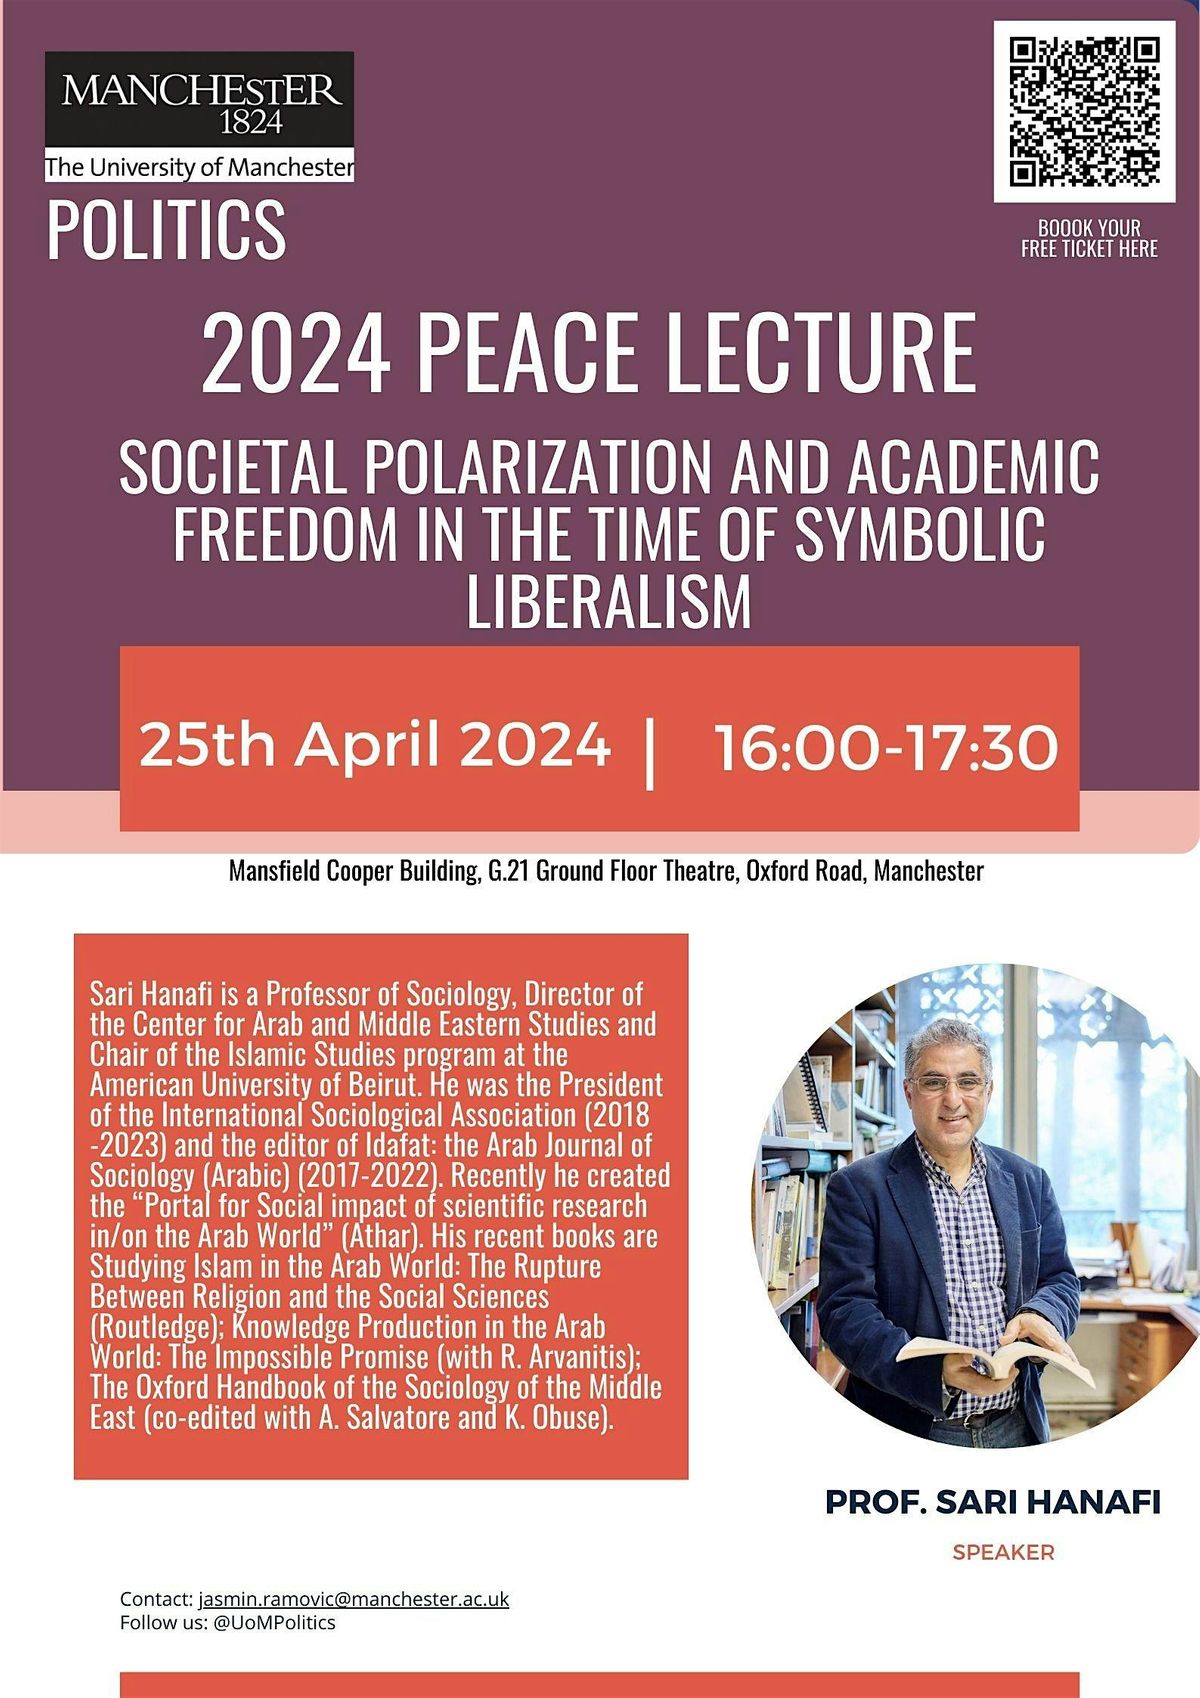 Politics, University of Manchester - Annual International Peace Lecture